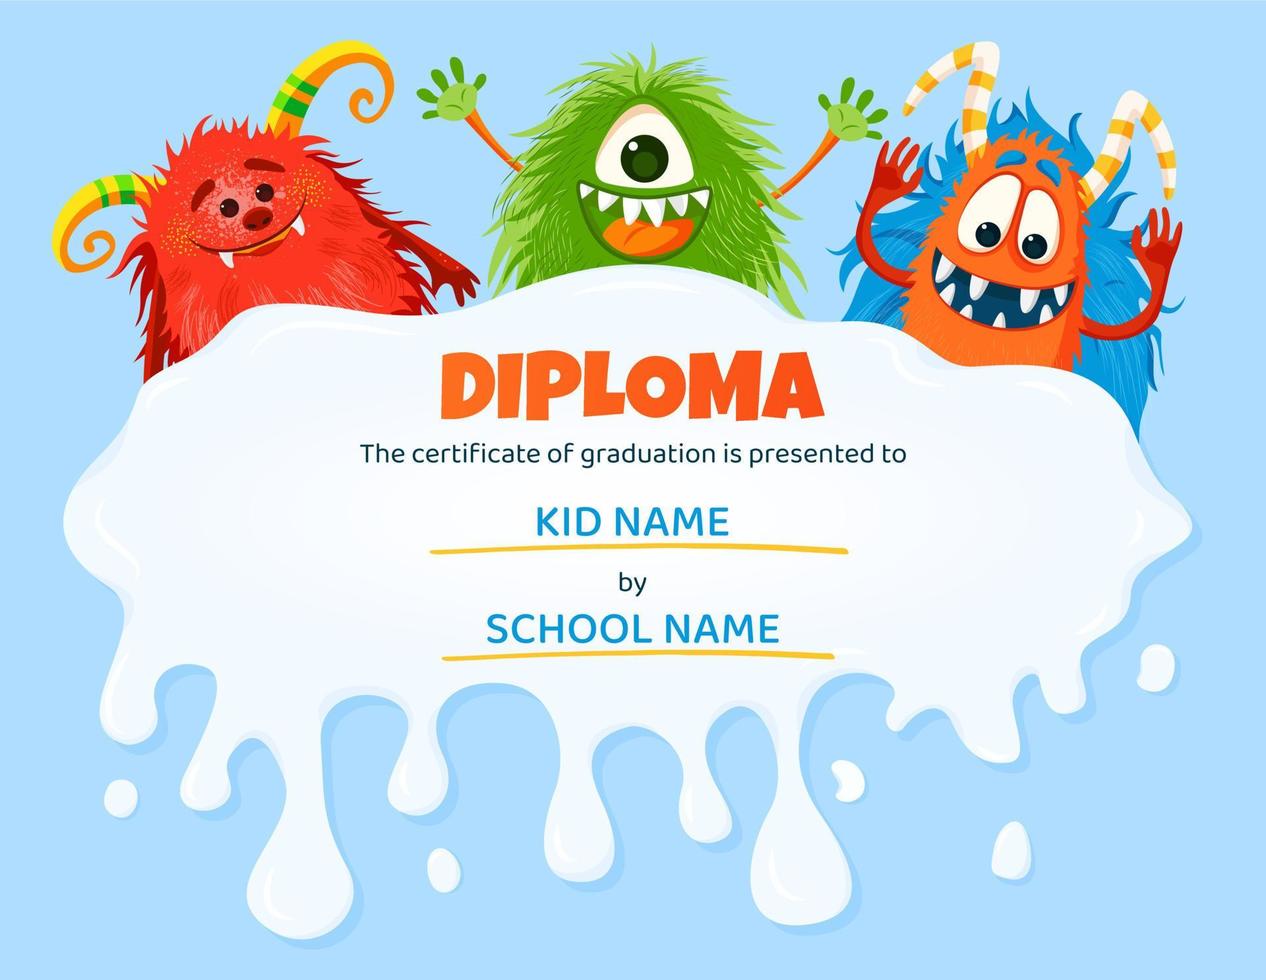 Kids diploma with cartoon funny monster characters. Education award frame template for school, summer camp or kindergarten certificate. Vector certificate with Monsters.